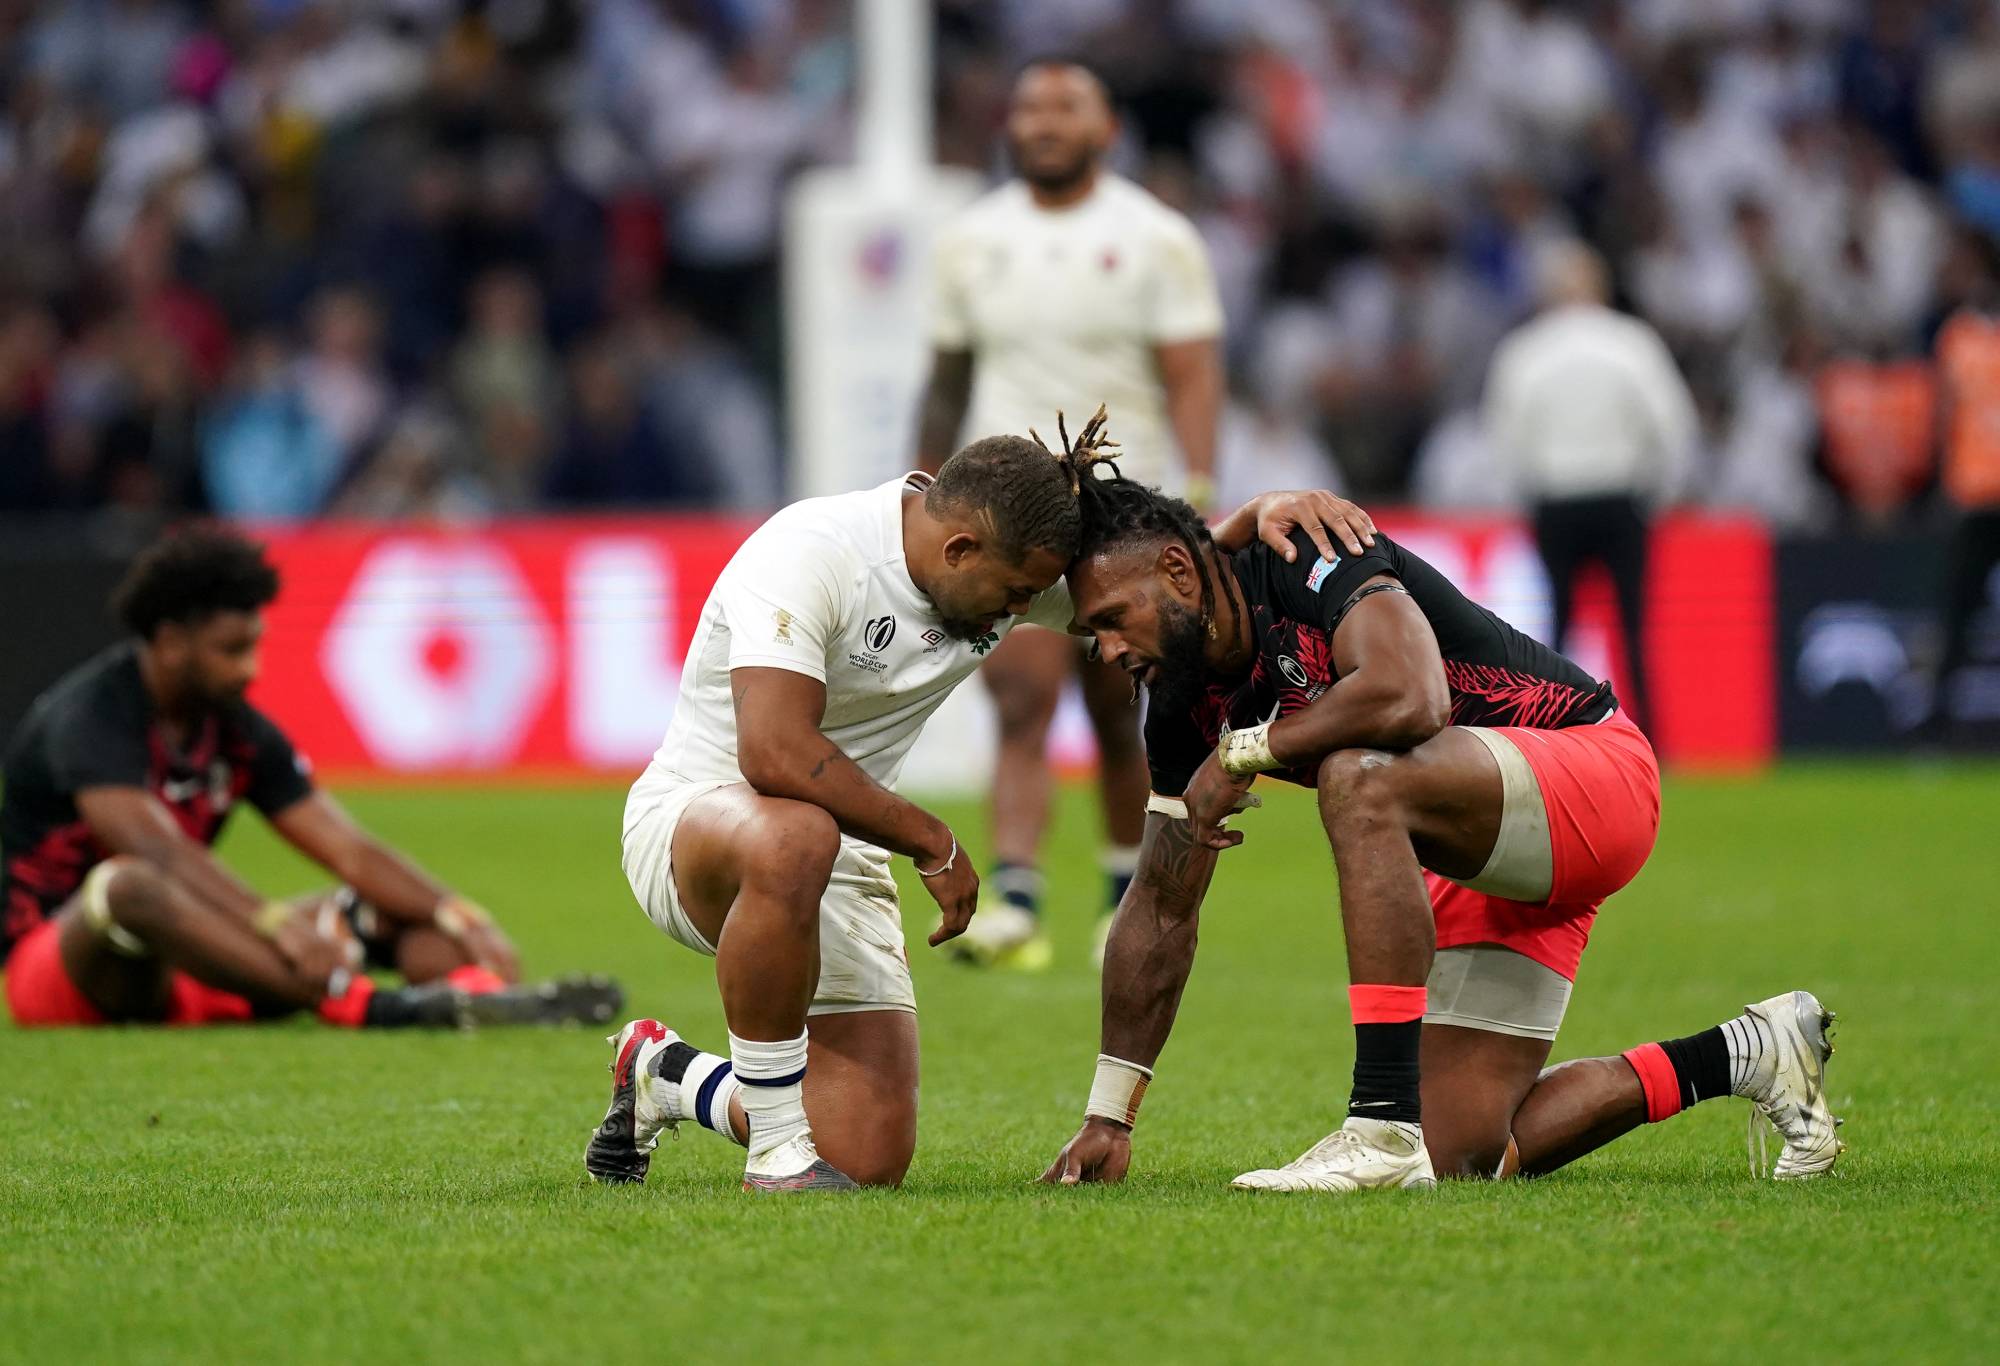 England's Ollie Lawrence consoles Fiji's Waisea Nayacalevu after the Rugby World Cup 2023 quarter-final match at the Stade Velodrome in Marseille, France. Picture date: Sunday October 15, 2023. (Photo by Mike Egerton/PA Images via Getty Images)